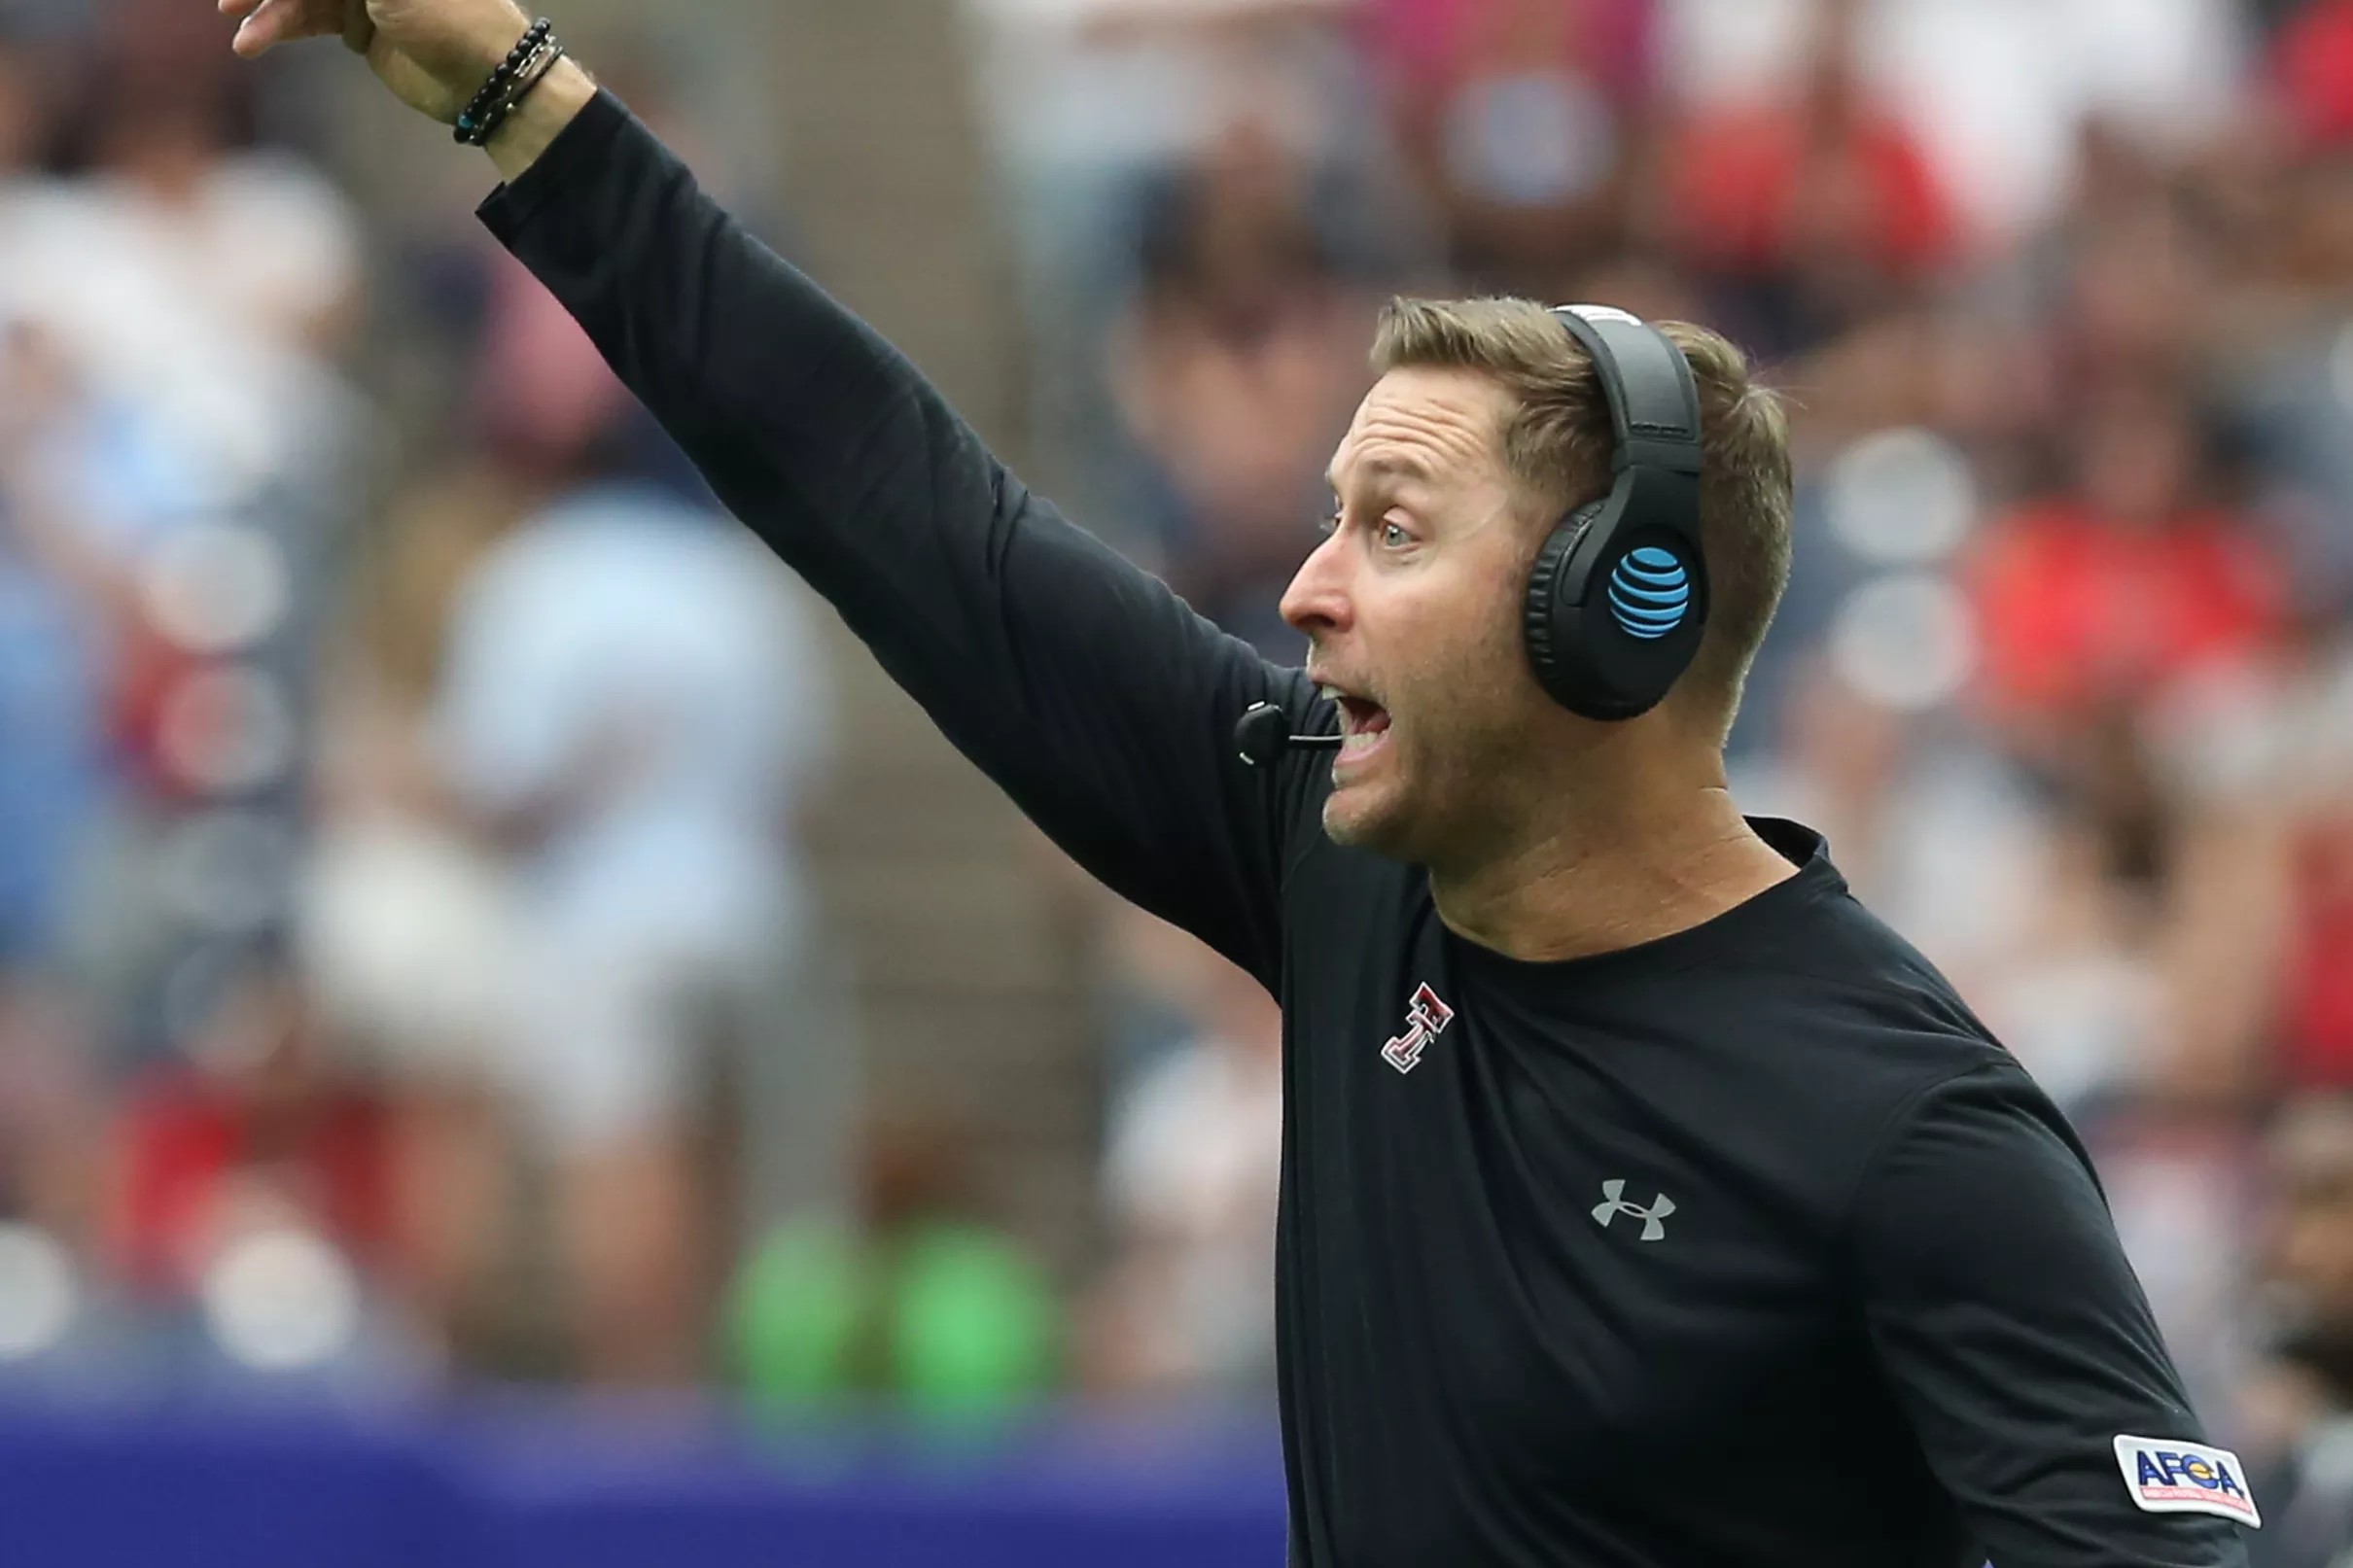 Kliff Kingsbury reportedly may resign from USC to pursue NFL coaching opportunities